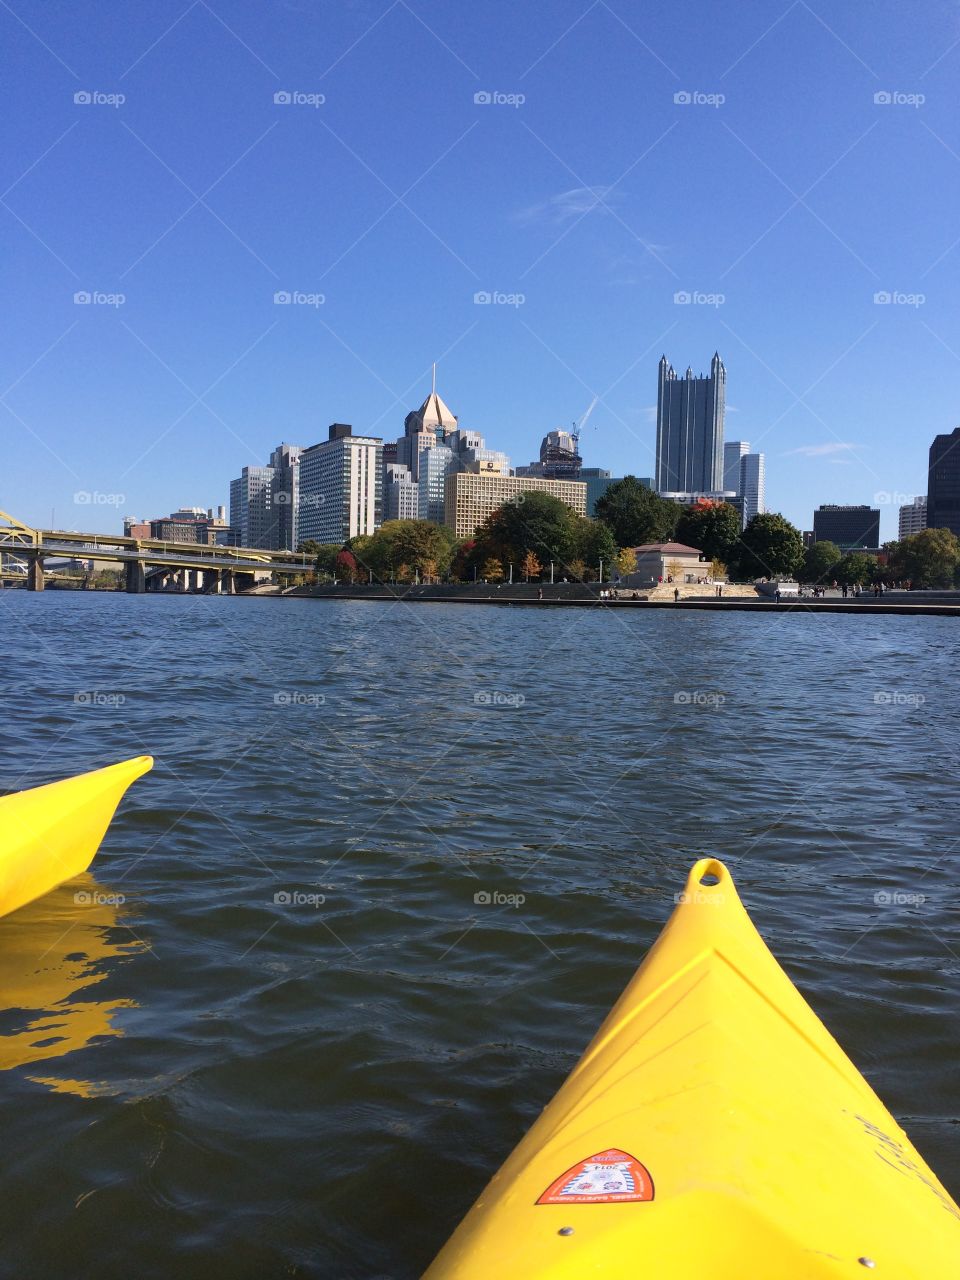 Kayaking in Pittsburgh. Beautiful day on the river